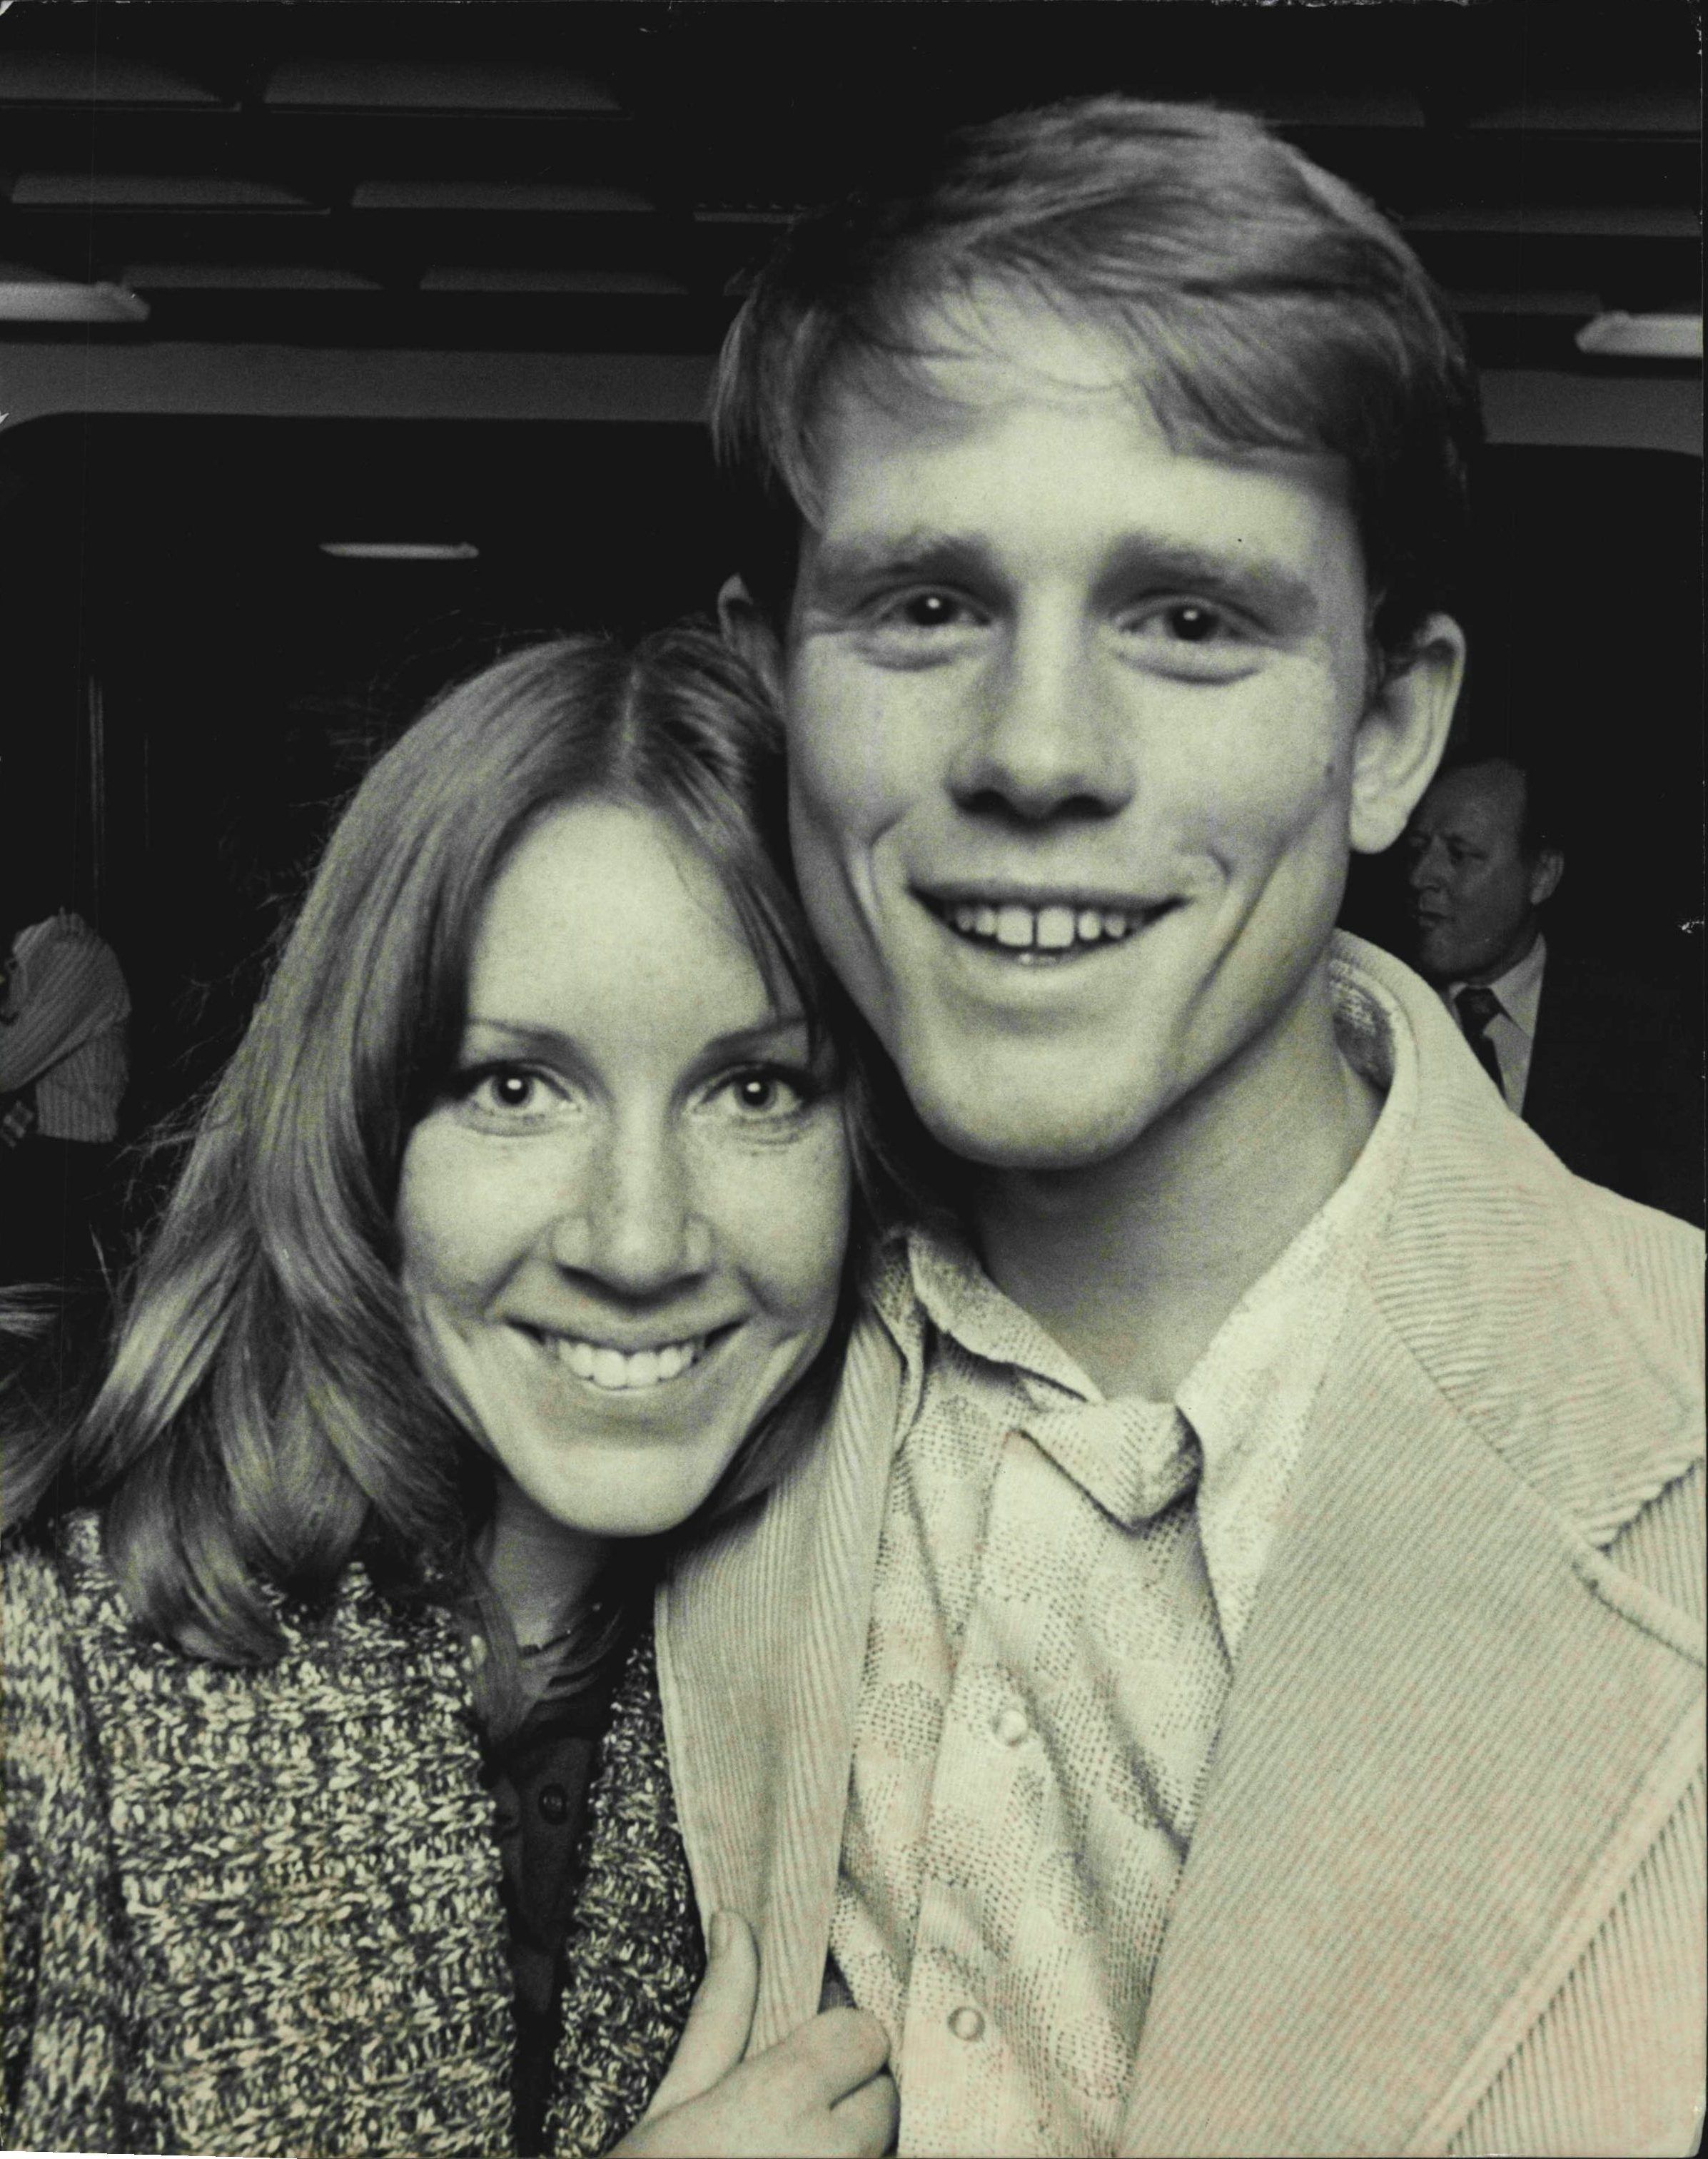 Ron and Cheryl Howard at a press reception on September 4, 1975. | Source: Getty Images